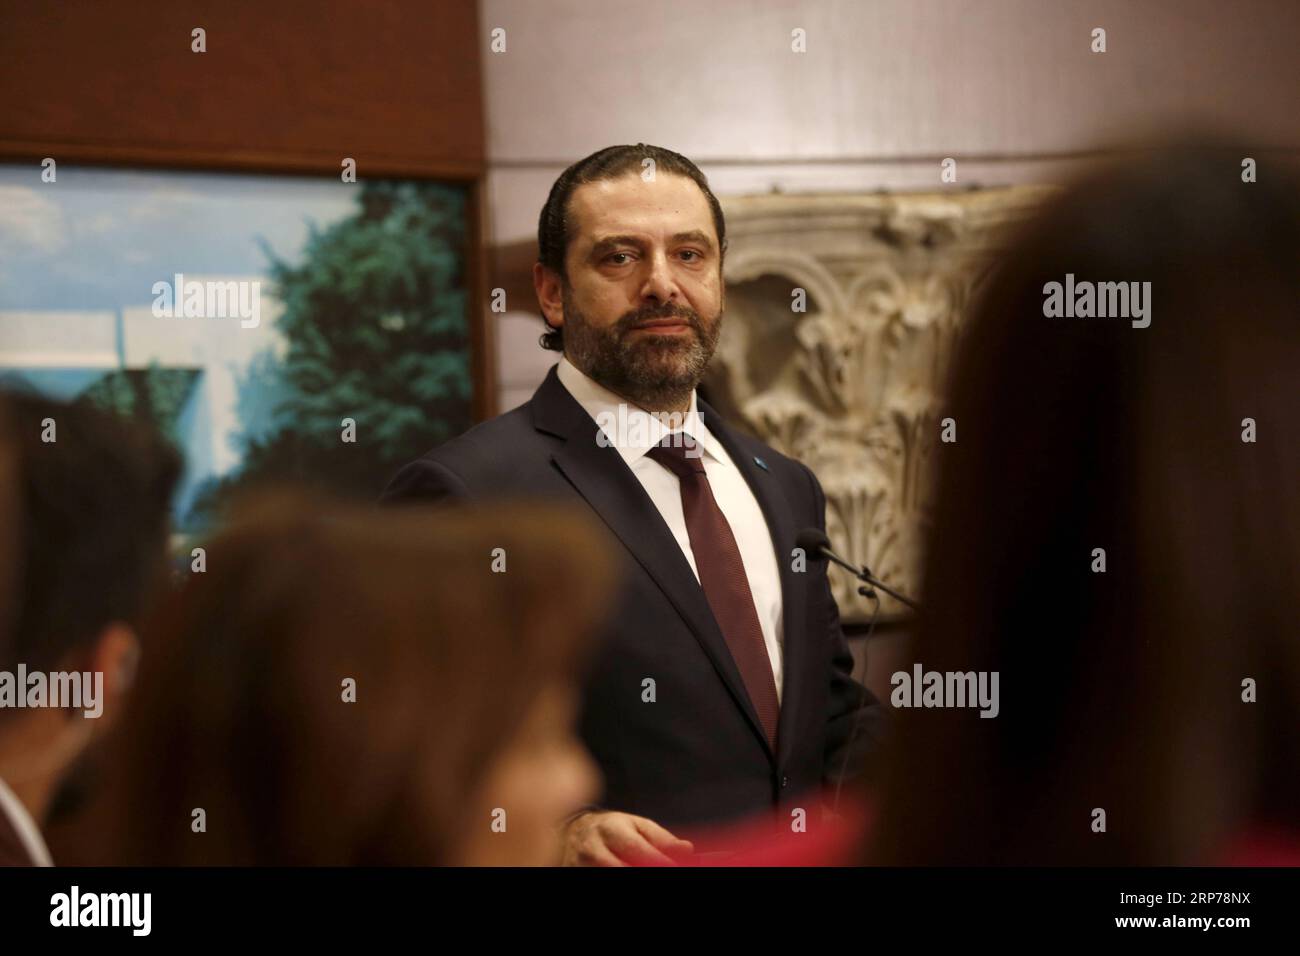 (190131) -- BEIRUT, Jan. 31, 2019 -- Lebanese Prime Minister Saad Hariri attends a press conference in Beirut, Lebanon, Jan. 31, 2019. Lebanon announced Thursday the formation of a new government, which is headed by Prime Minister Saad Hariri, breaking a nine-month political deadlock in the country, local TV Channel LBCI reported. ) LEBANON-BEIRUT-PM-NEW GOVERNMENT BilalxJawich PUBLICATIONxNOTxINxCHN Stock Photo